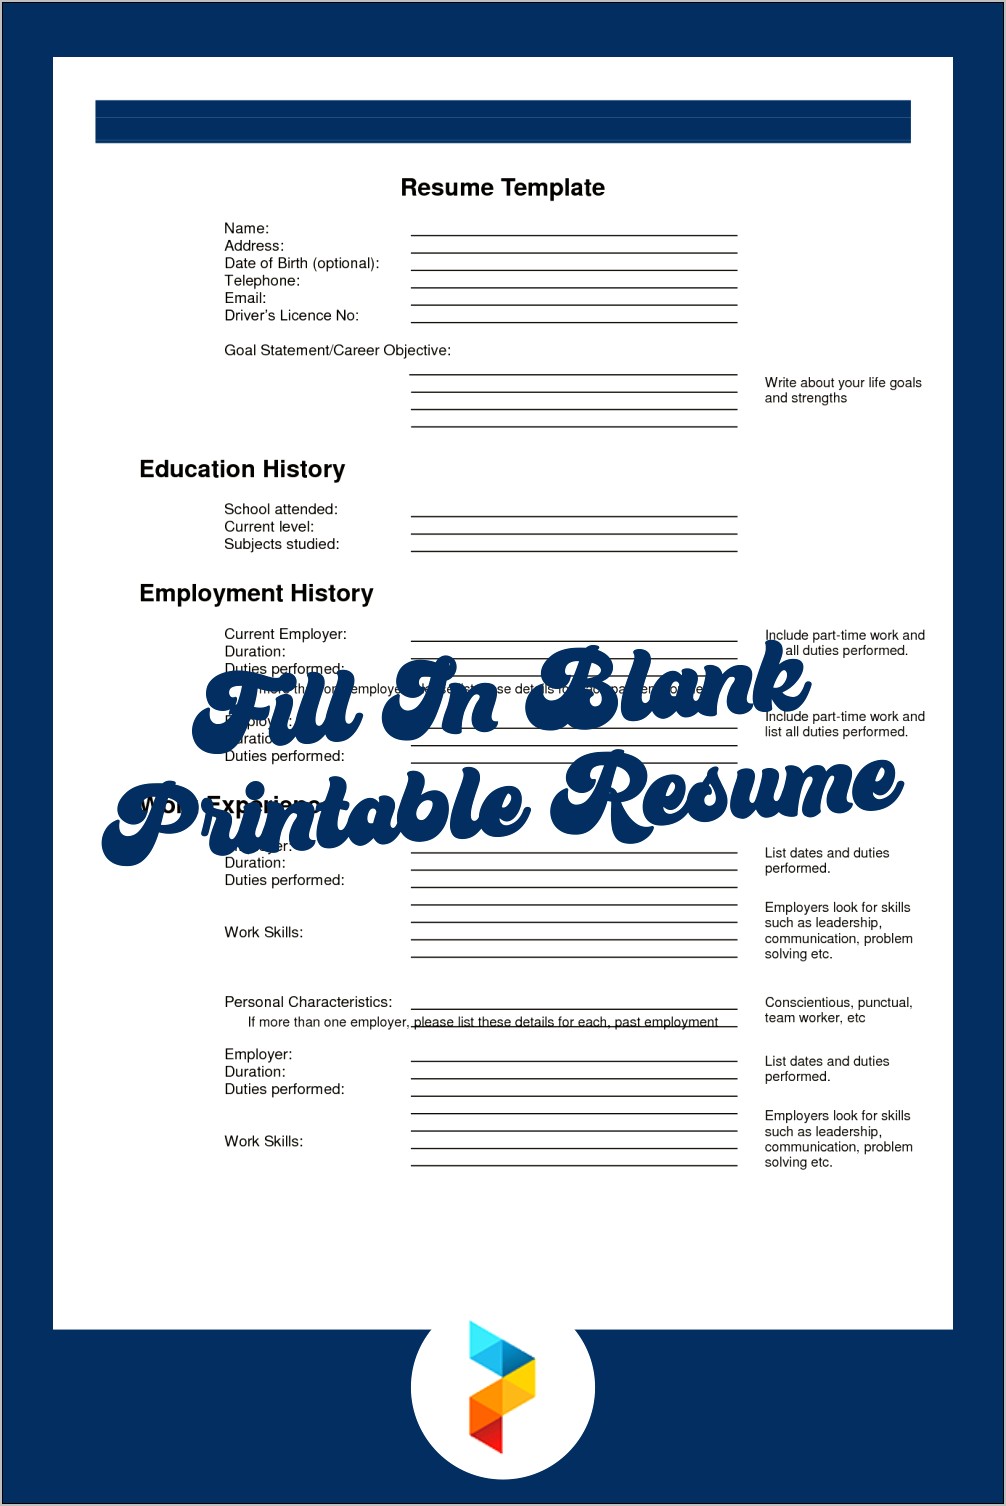 Resume Fill In The Blank Template